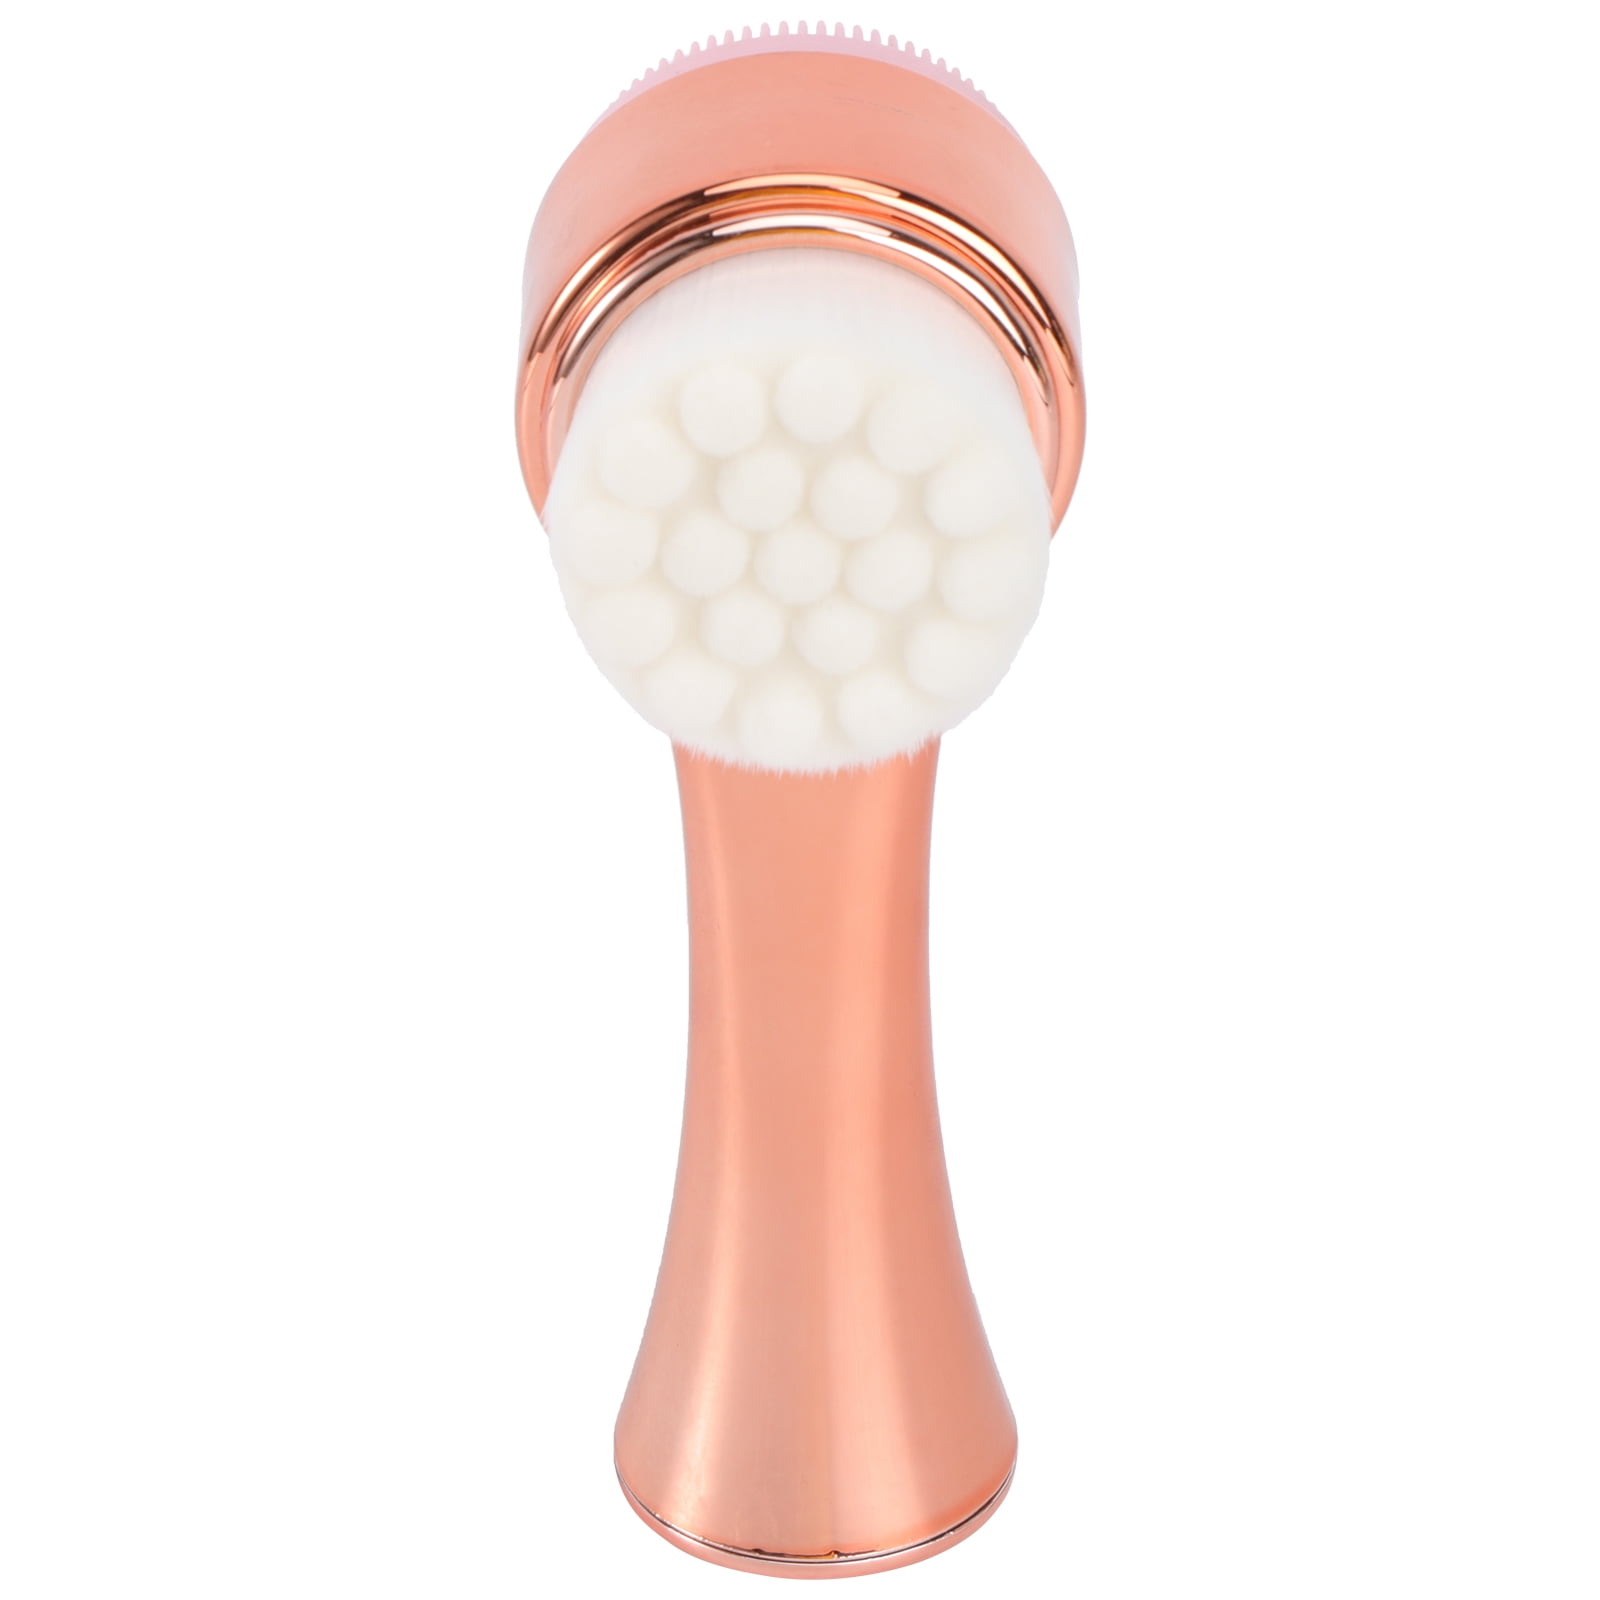 Manual Facial Brush Facial Cleansing Brush Portable Skin Care Massage Tool Home Cleaner Woman Accessory for Women Lady (Rose